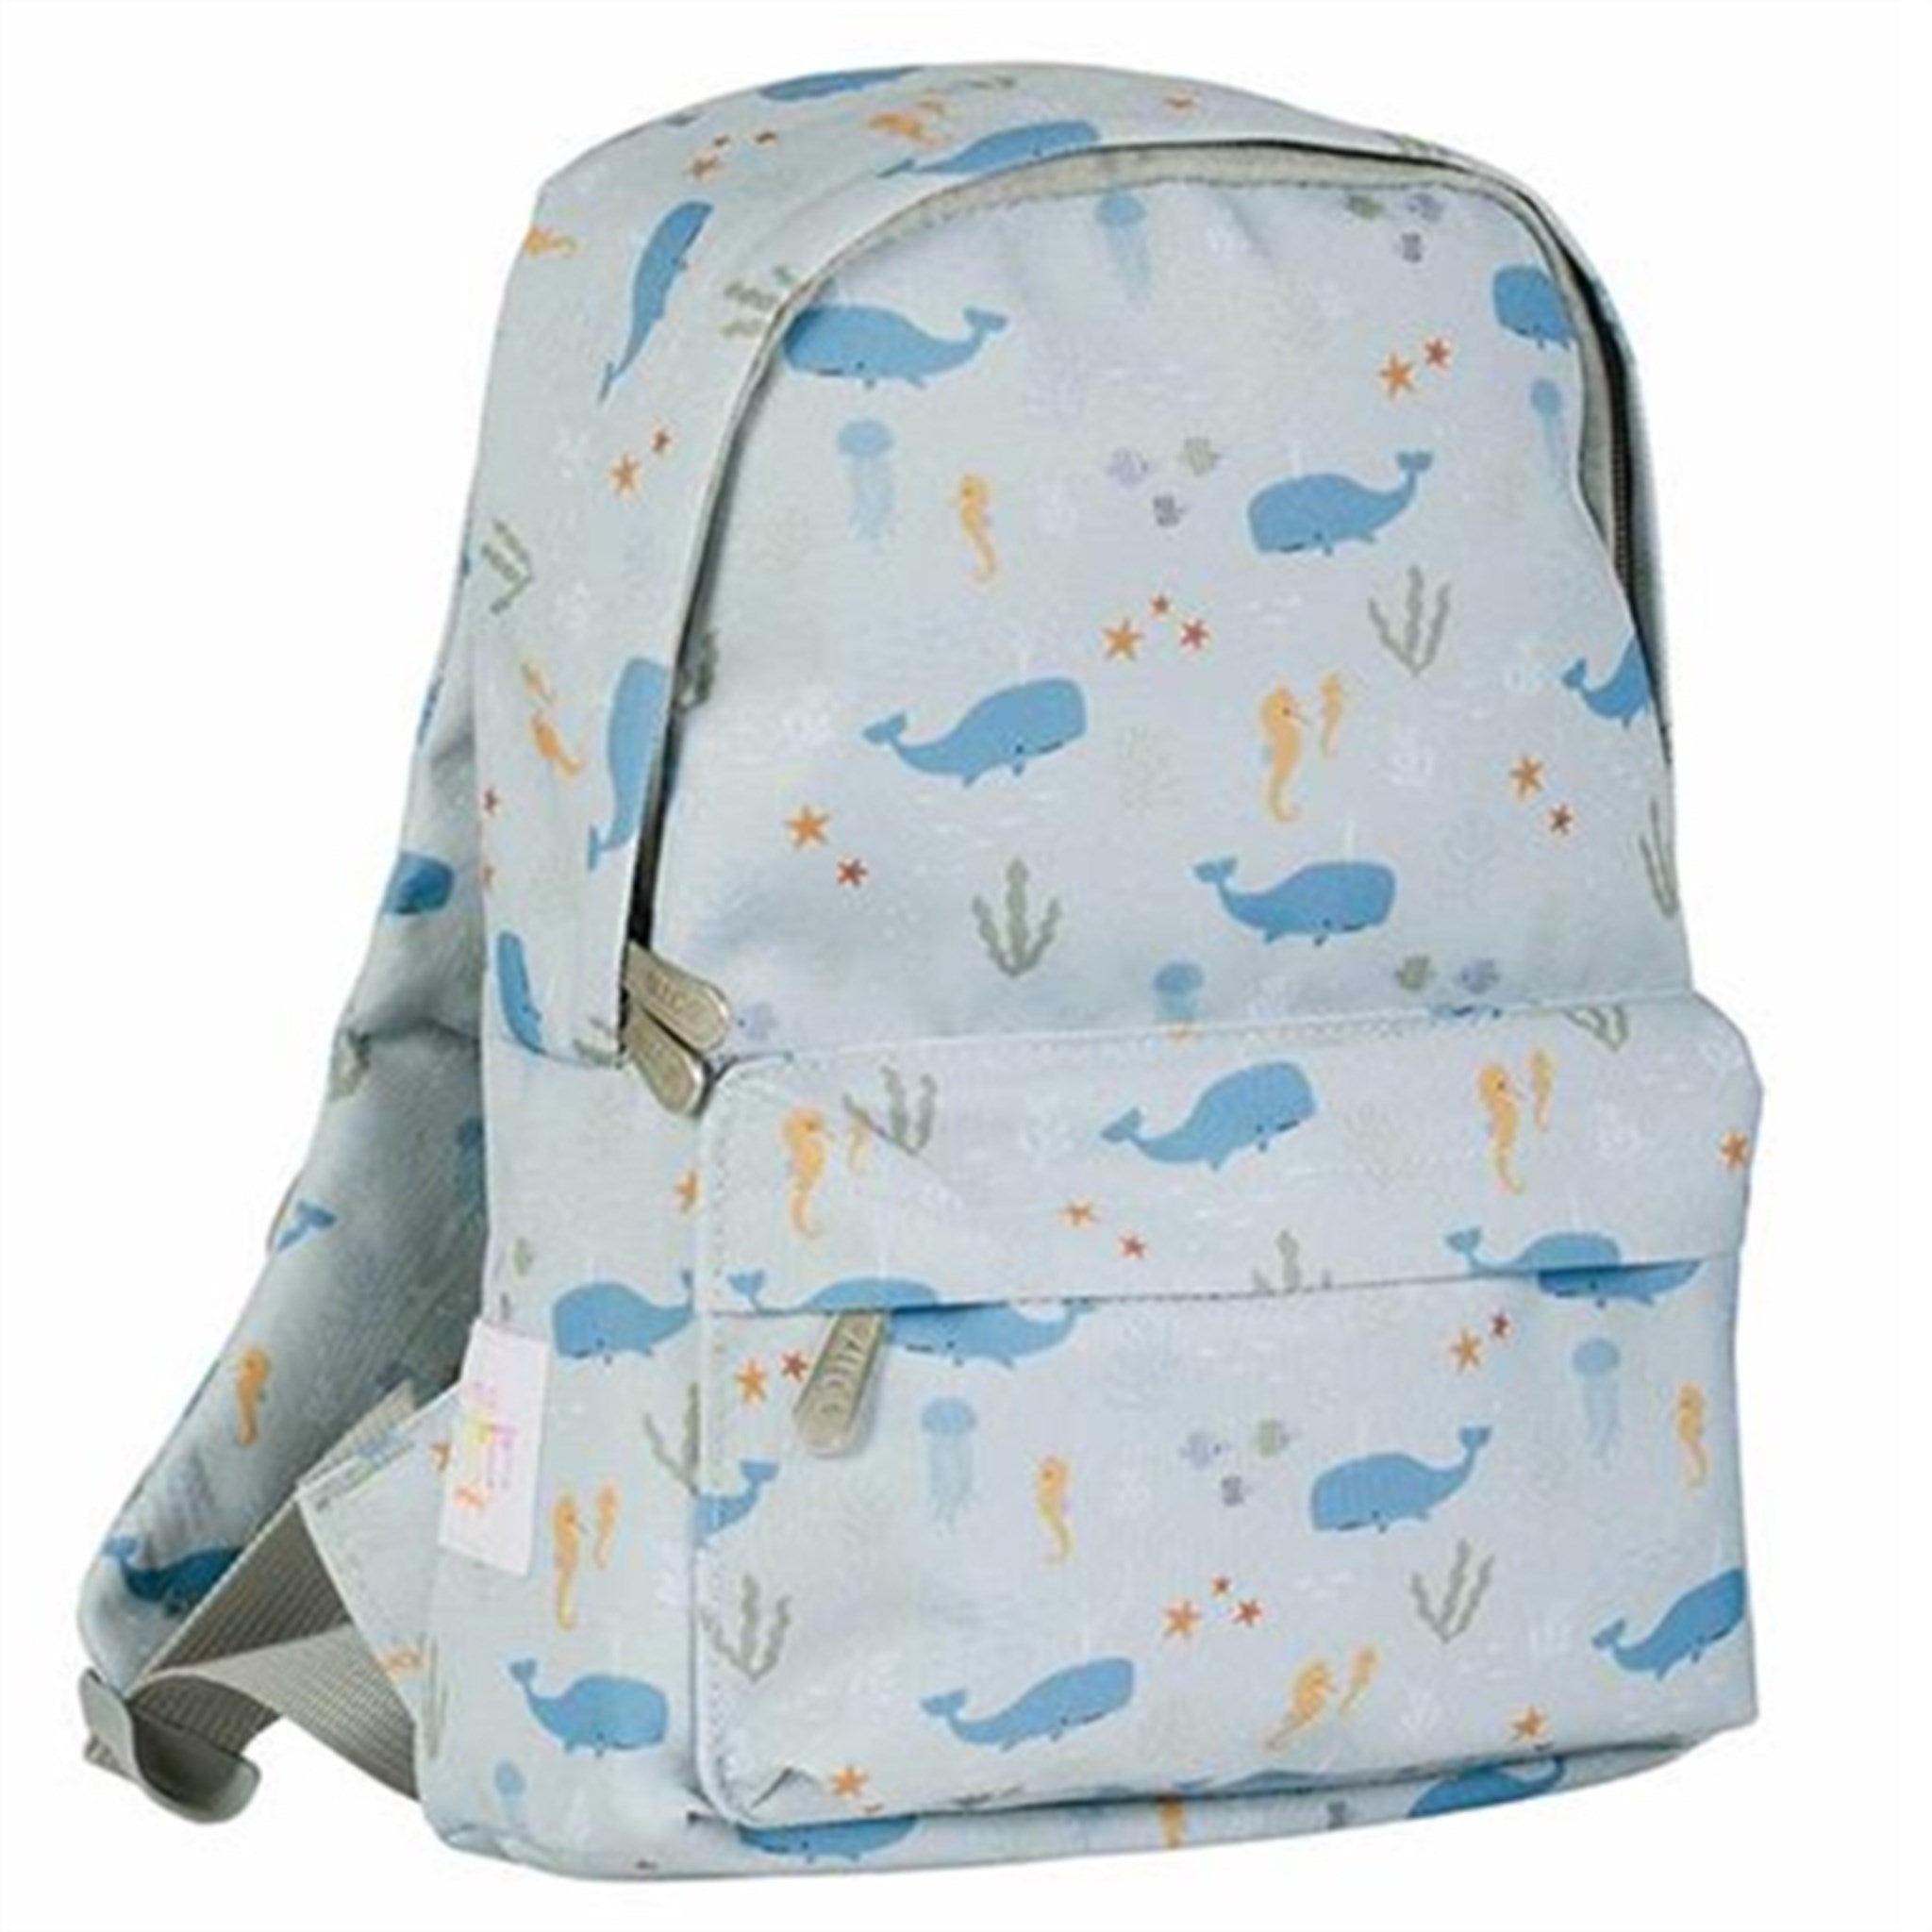 A Little Lovely Company Backpack Small Ocean 5